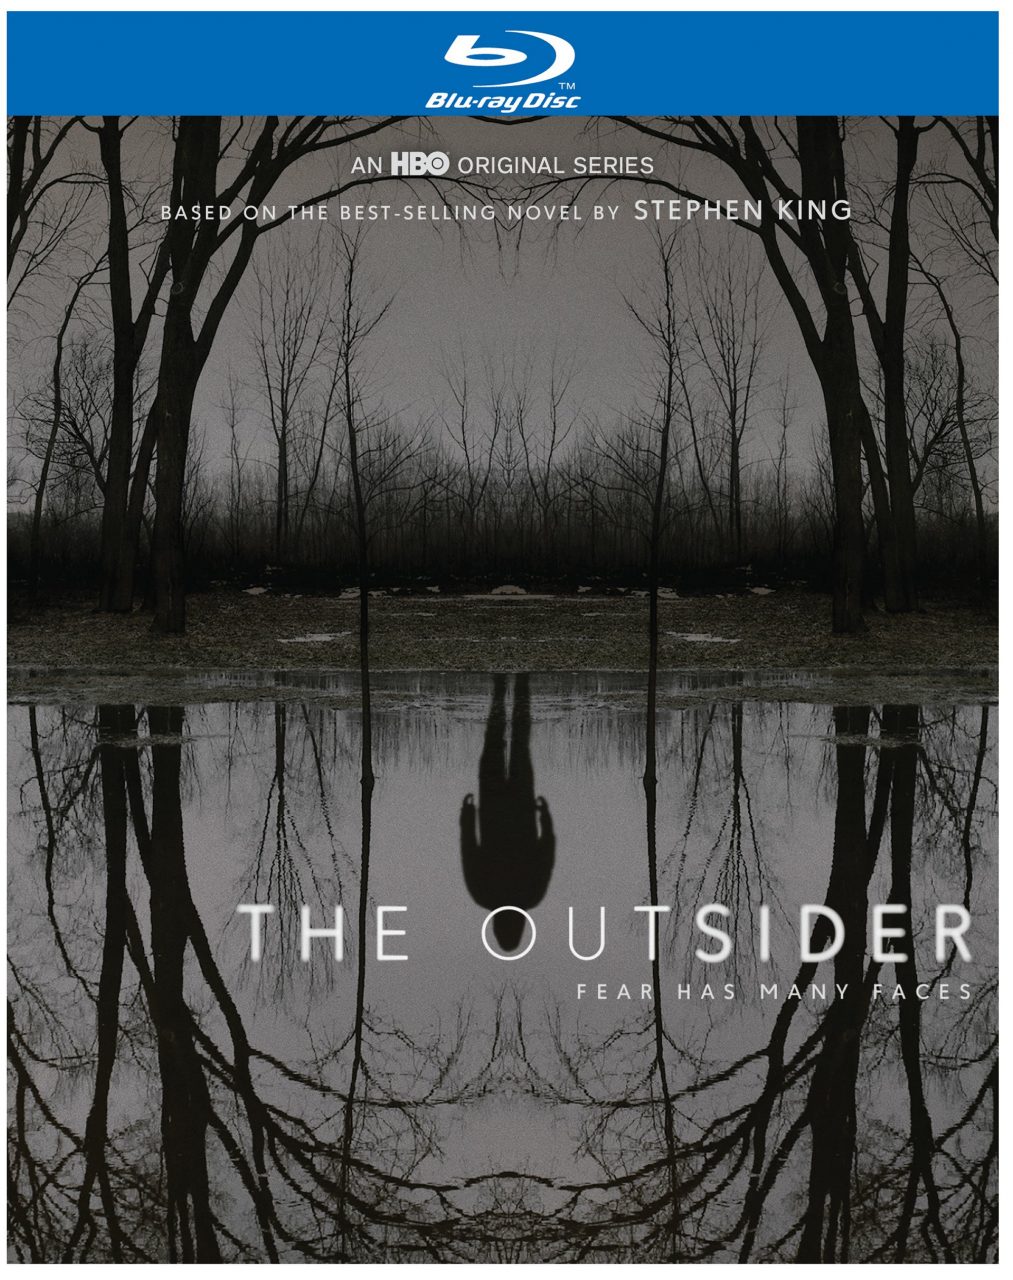 The Outsider: The Complete First Season Blu-Ray cover (Warner Bros. Home Entertainment)